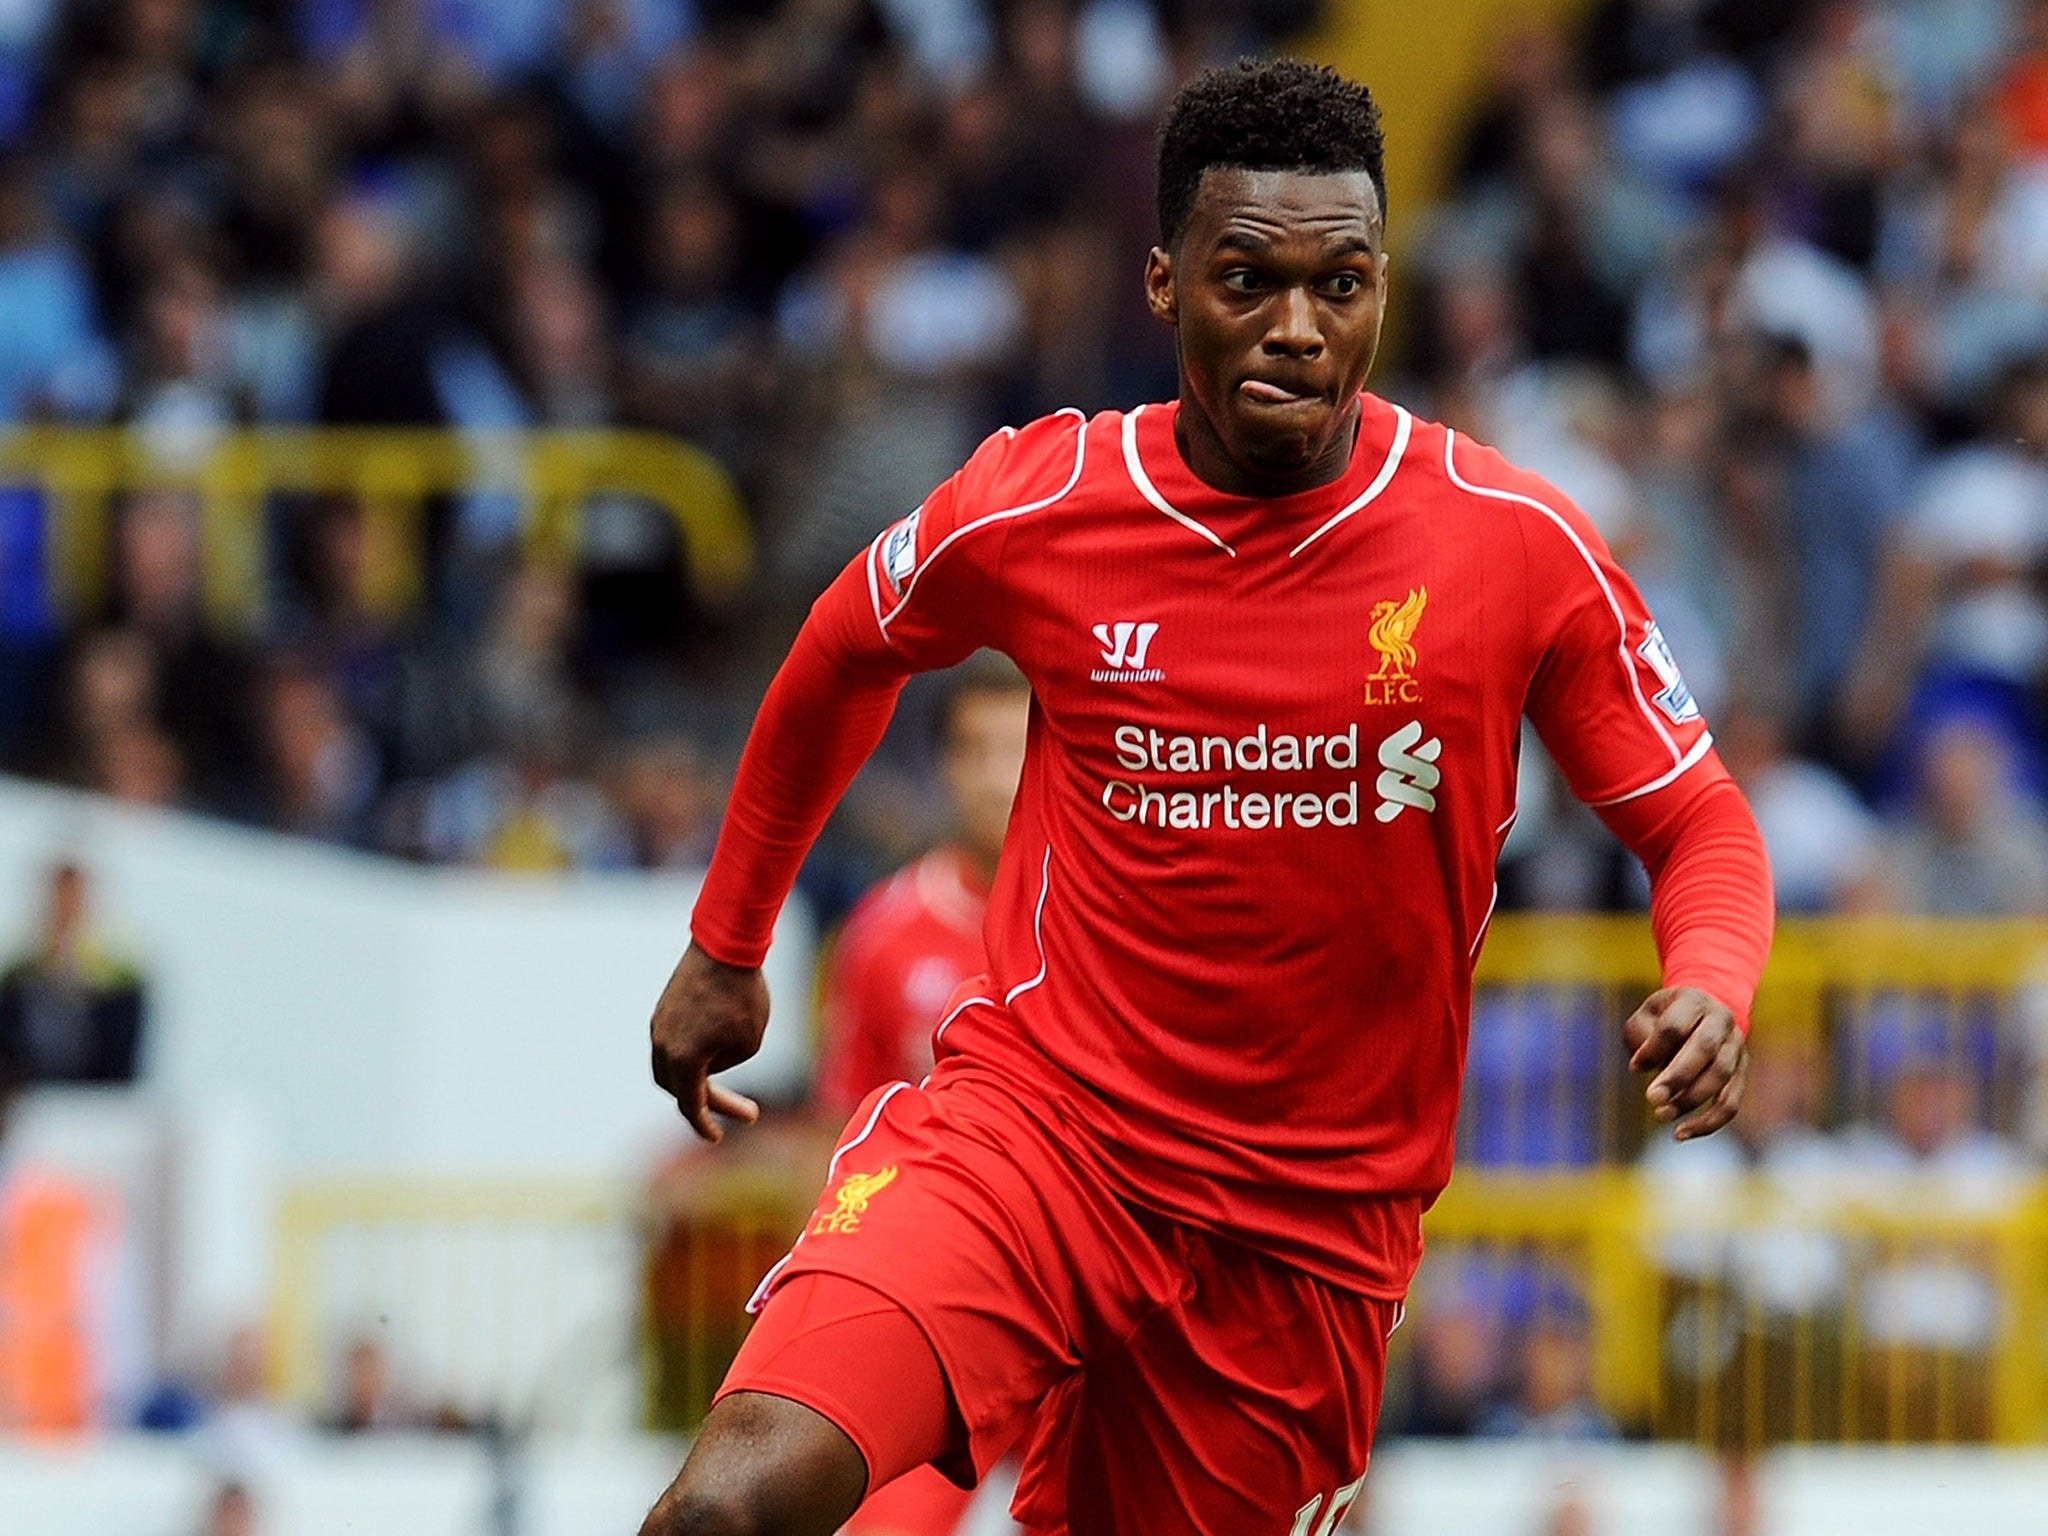 Daniel Sturridge has suffered nine injuries to the same left thigh
during his 10-year career